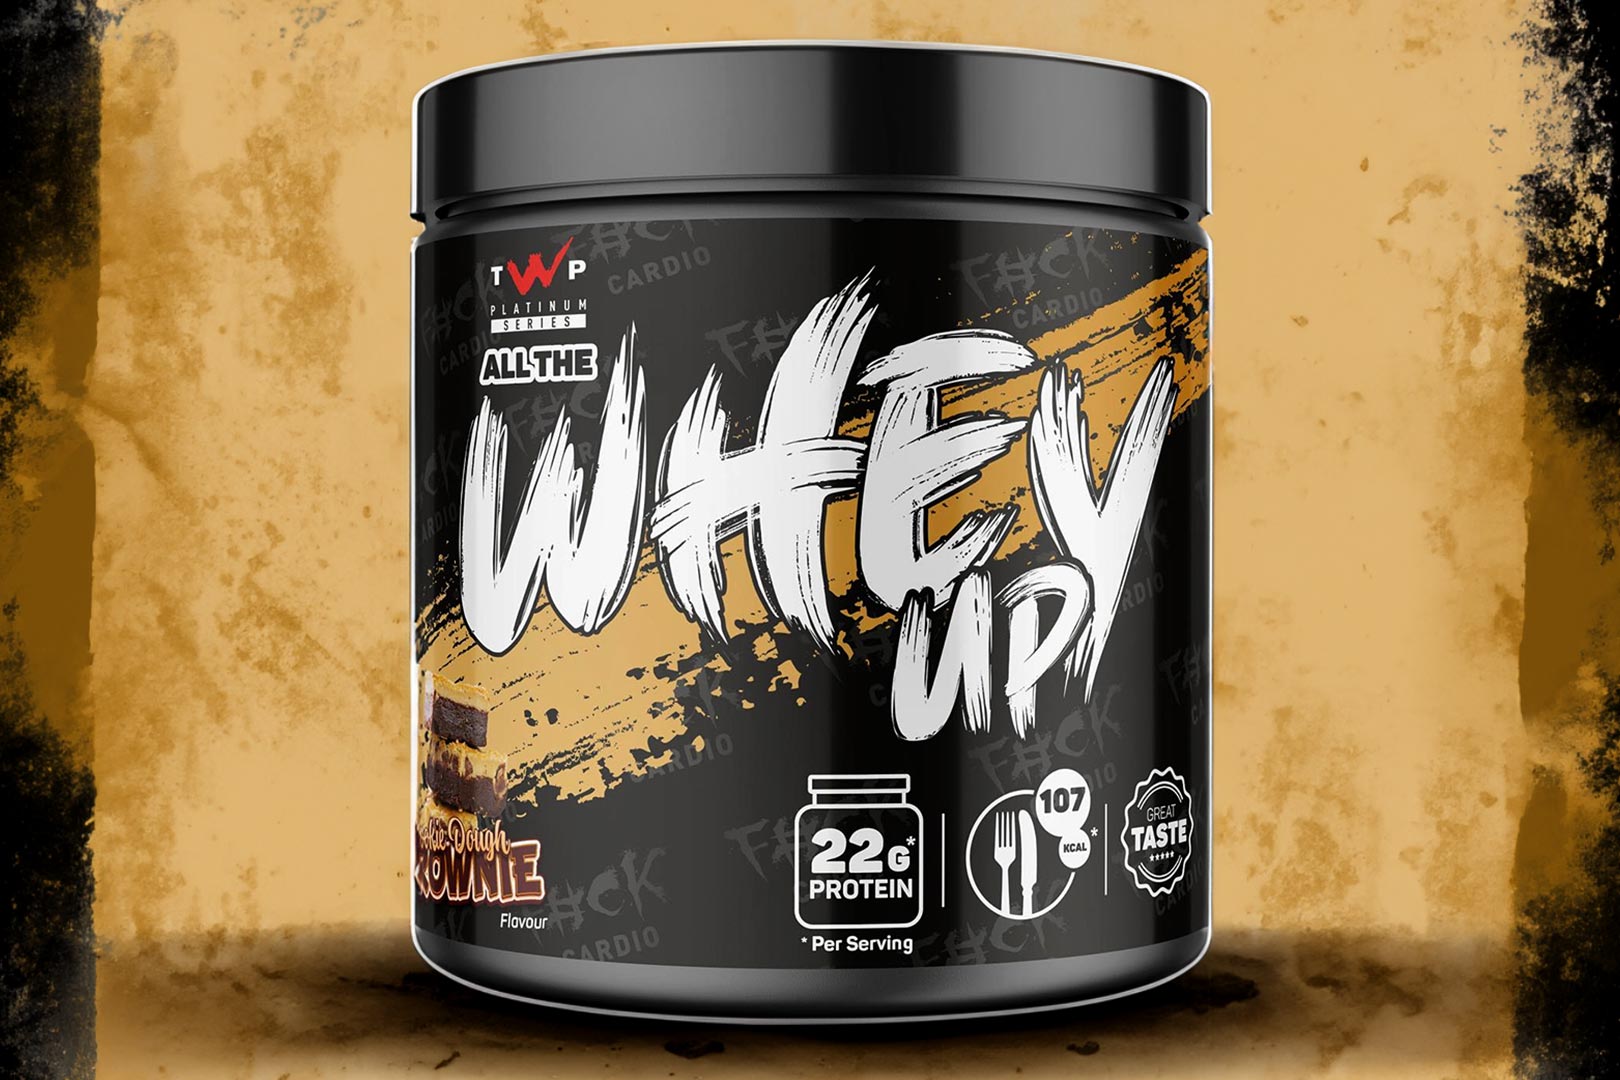 Twp Nutrition Trial Size All The Whey Up